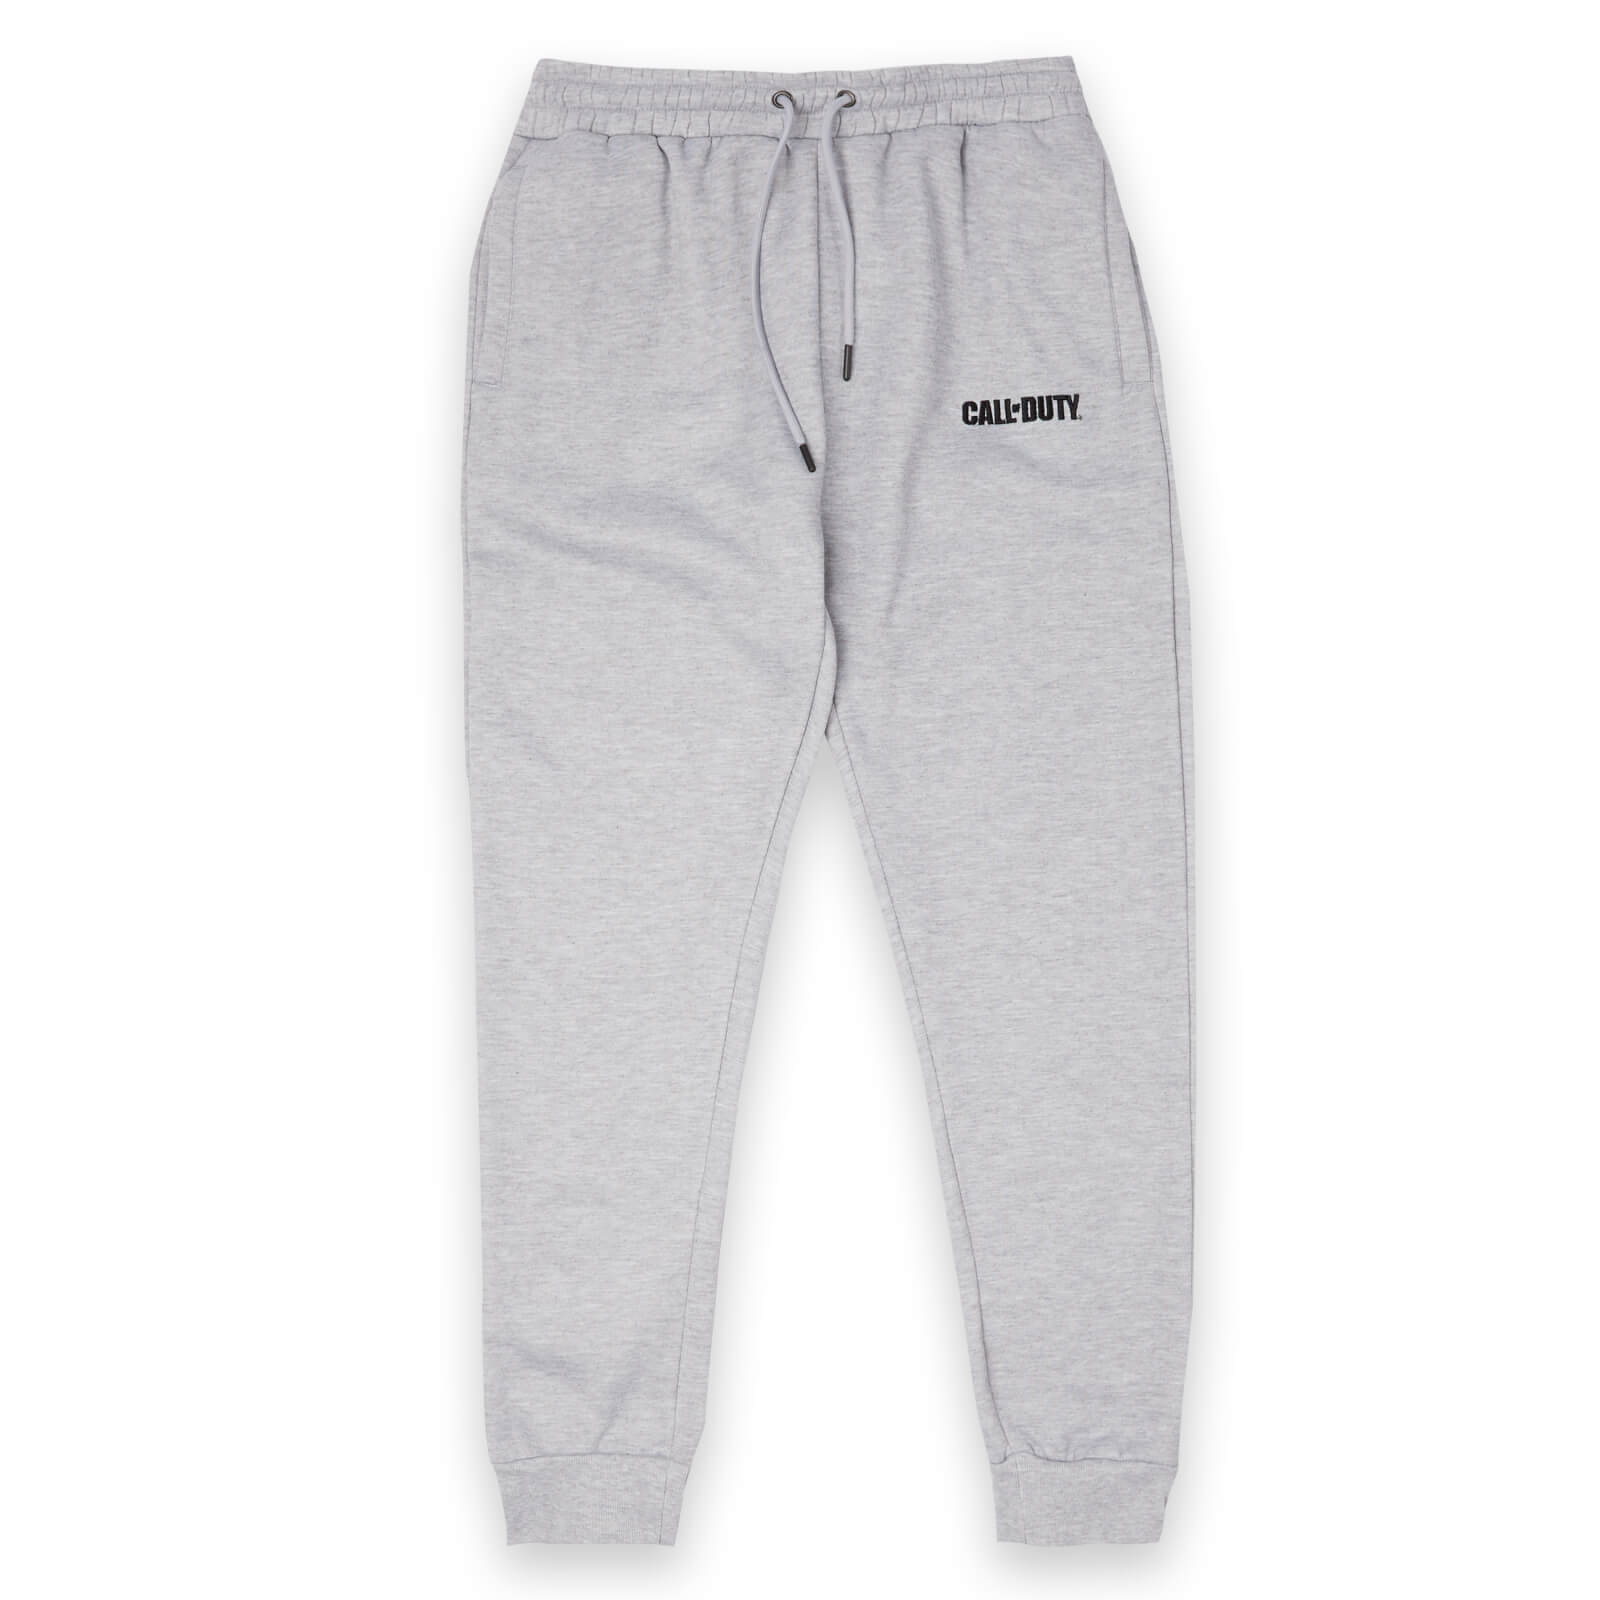 Call Of Duty Logo Embroidered Unisex Joggers - Grey - S - Grey